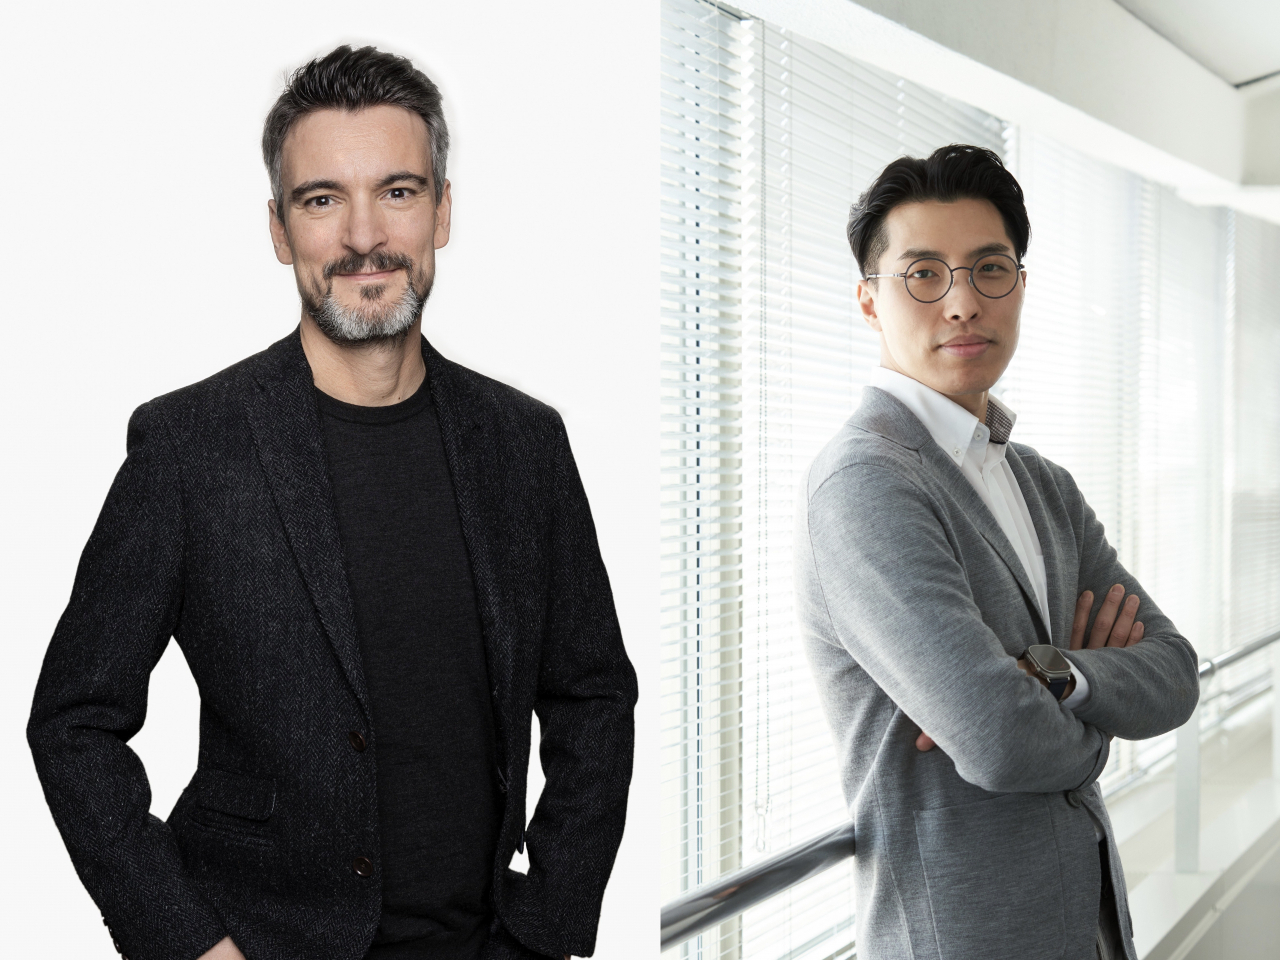 Oliver Samson (left), formerly of Mercedes-Benz, and Lim Seung-mo, who previously worked with BMW, will take over as heads of the Kia Design Center Europe and the Kia Design Center China, respectively, starting April 1. (Kia)